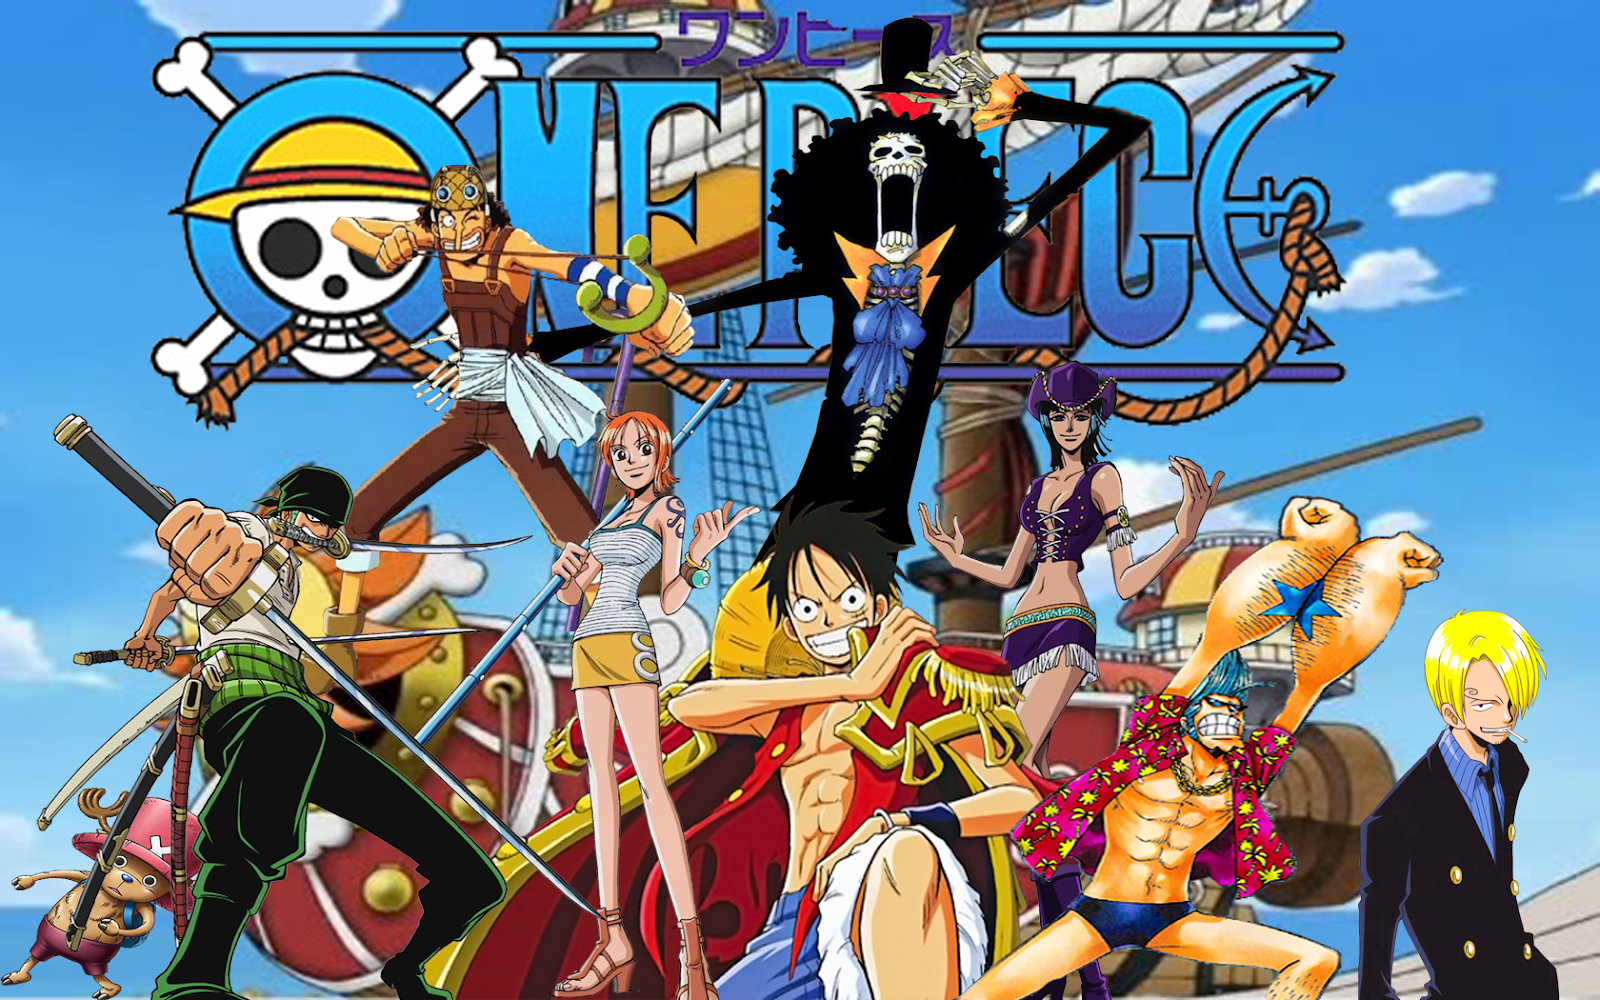 http://vignette2.wikia.nocookie.net/toonami/images/5/5a/One-piece.png/revision/latest?cb=20130413234202